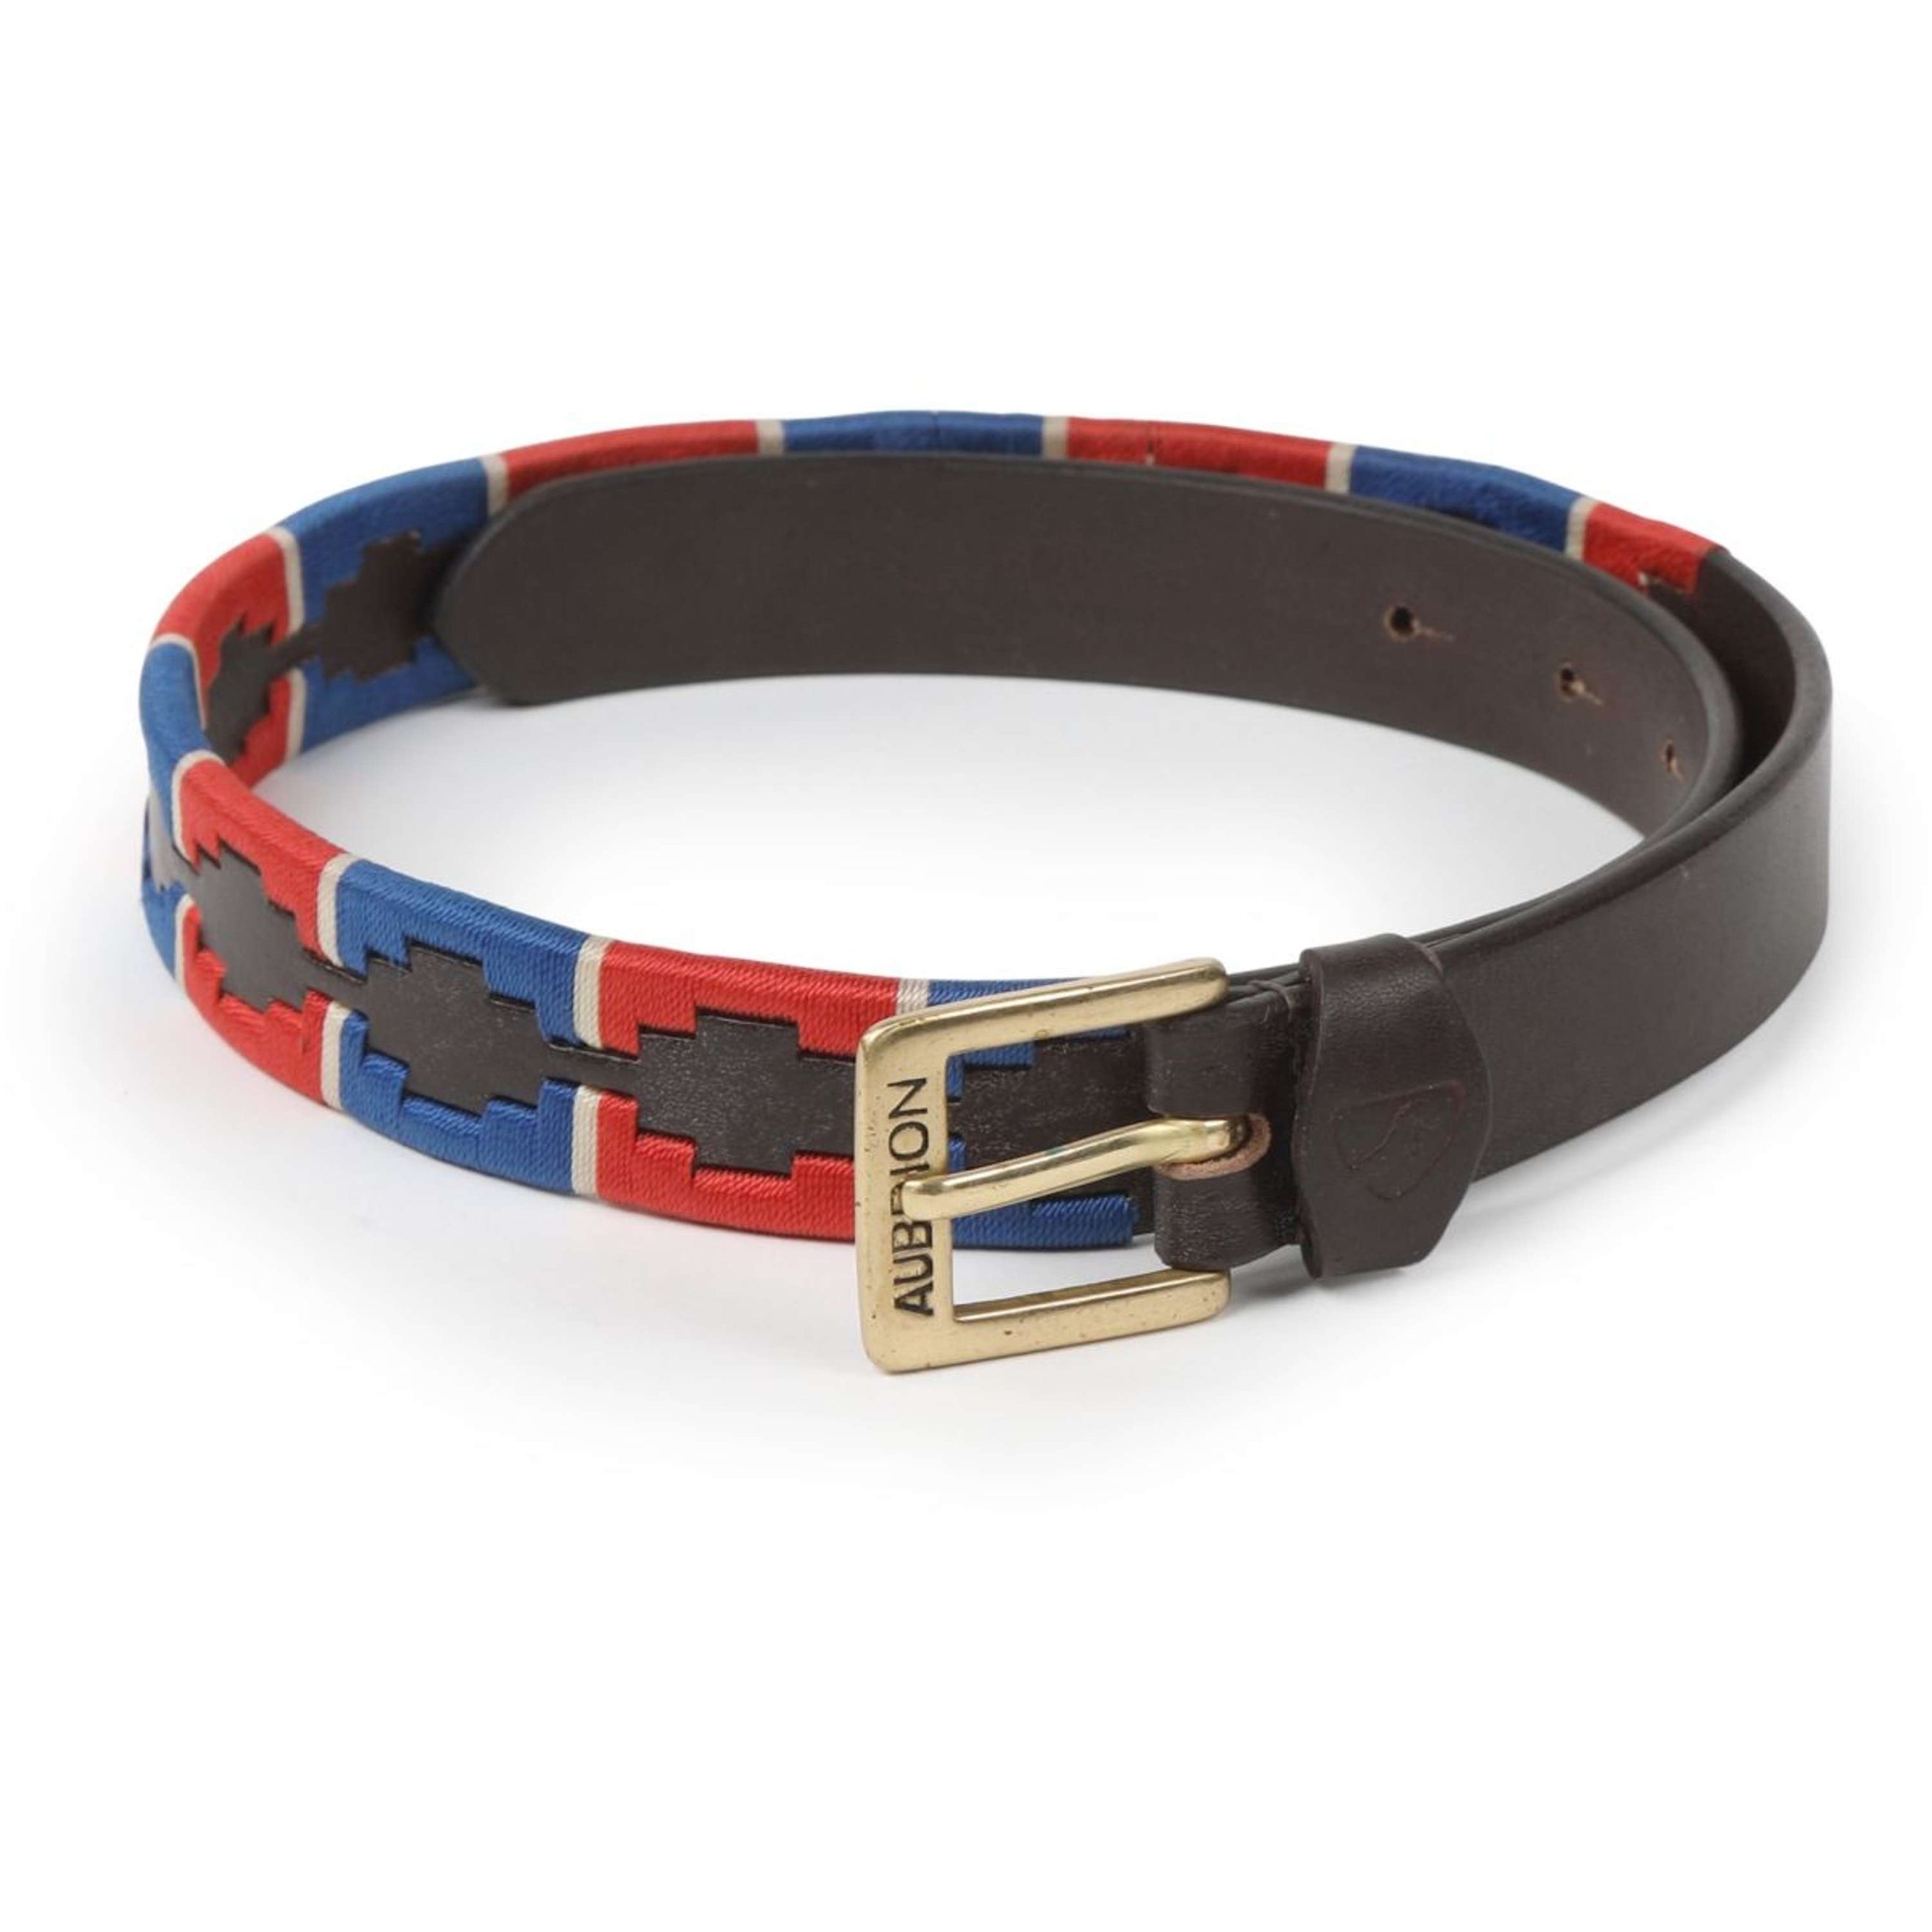 Aubrion by Shires Ceinture Skinny Polo Marine/Rouge